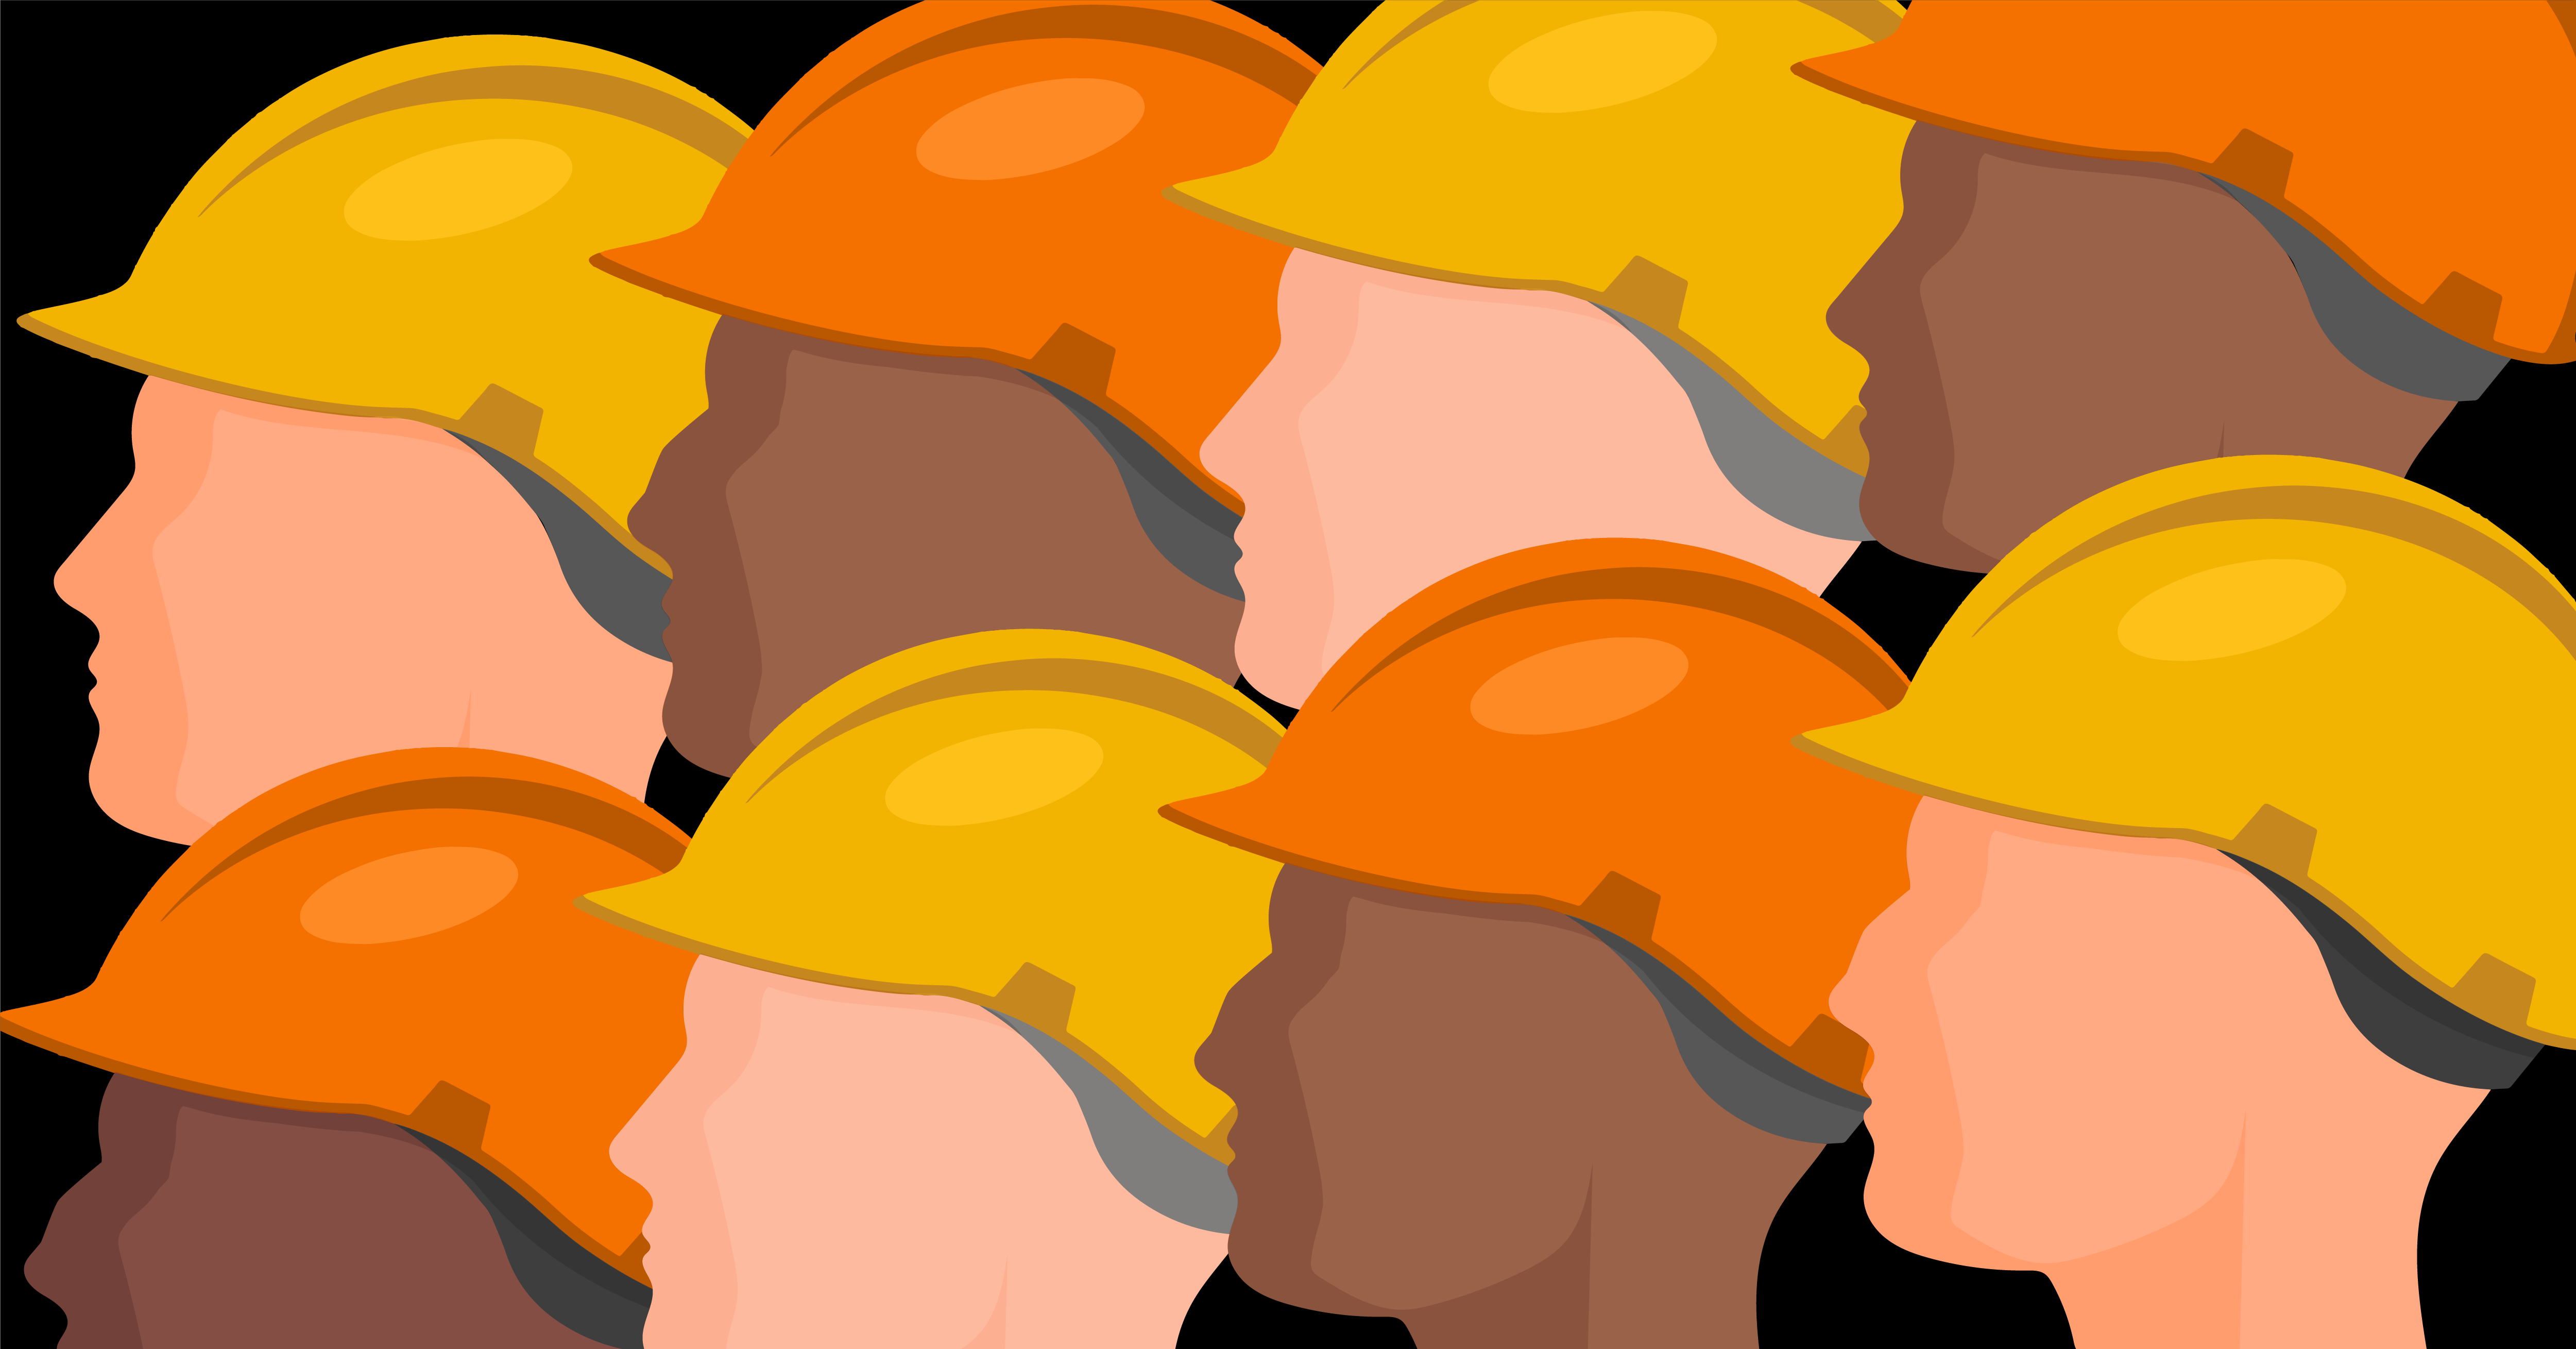 Hiring in Construction- How to Attract Diverse Talent SmartBarrel